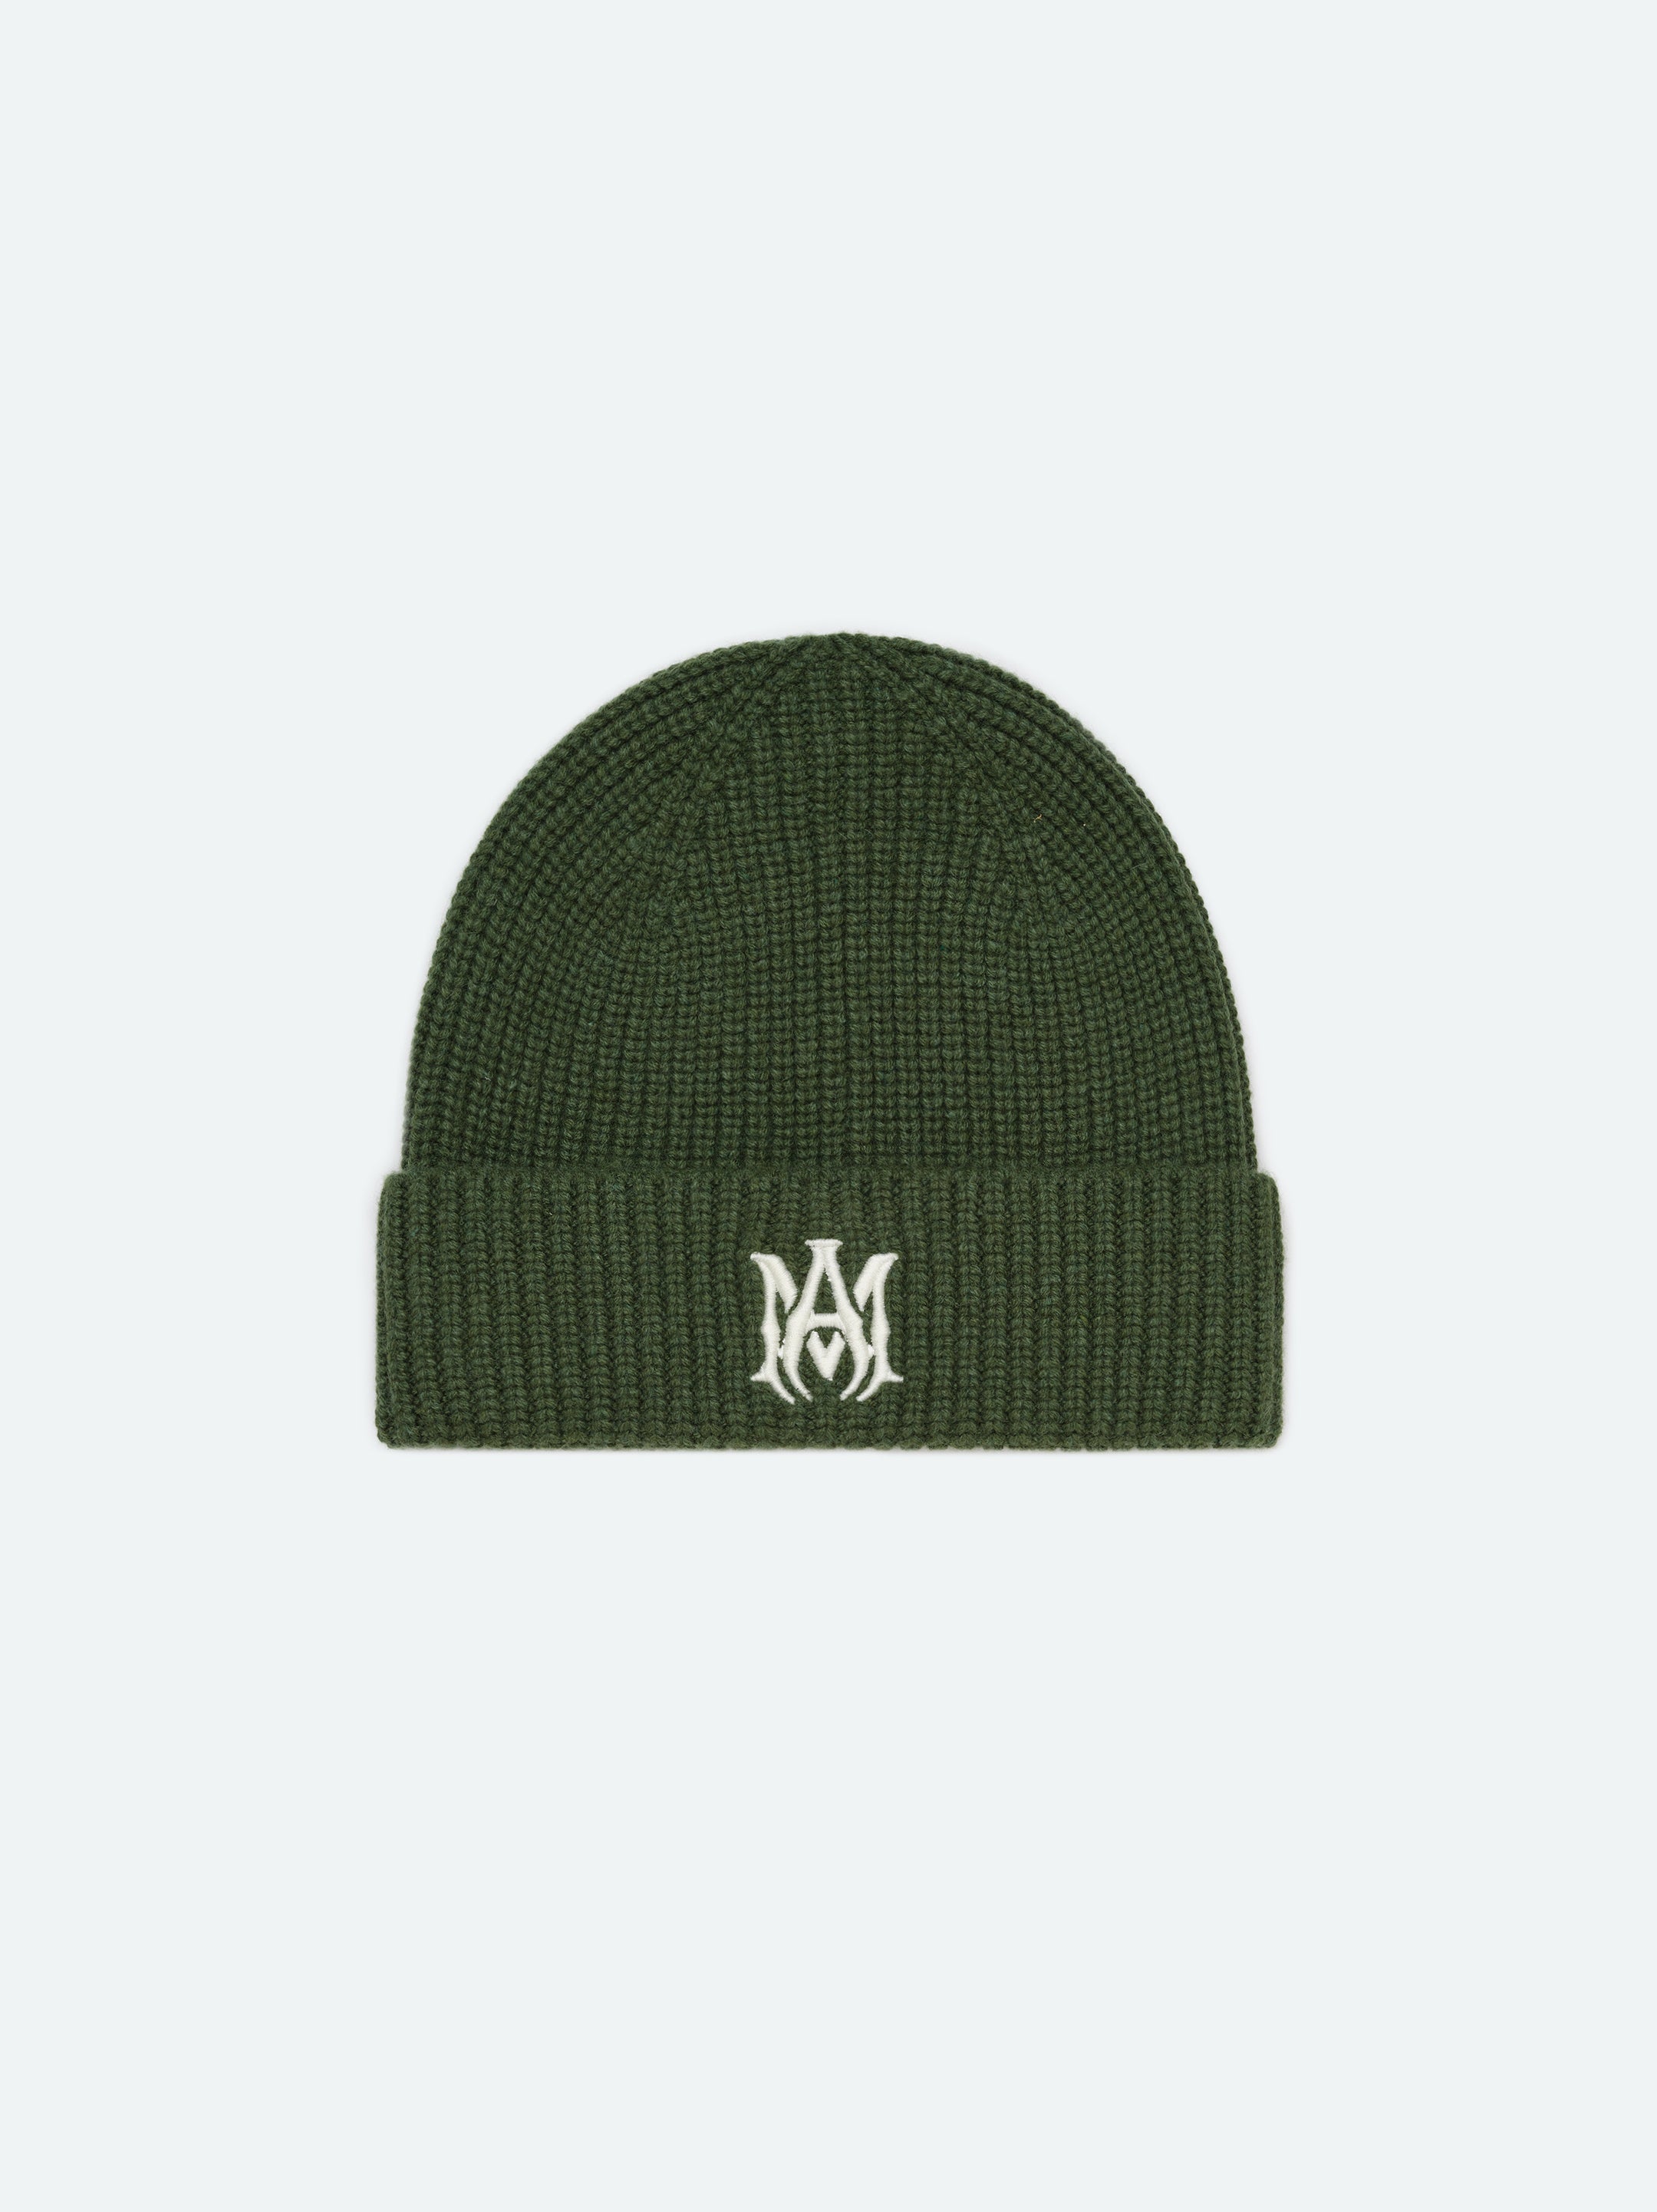 Product MA BEANIE - Green featured image